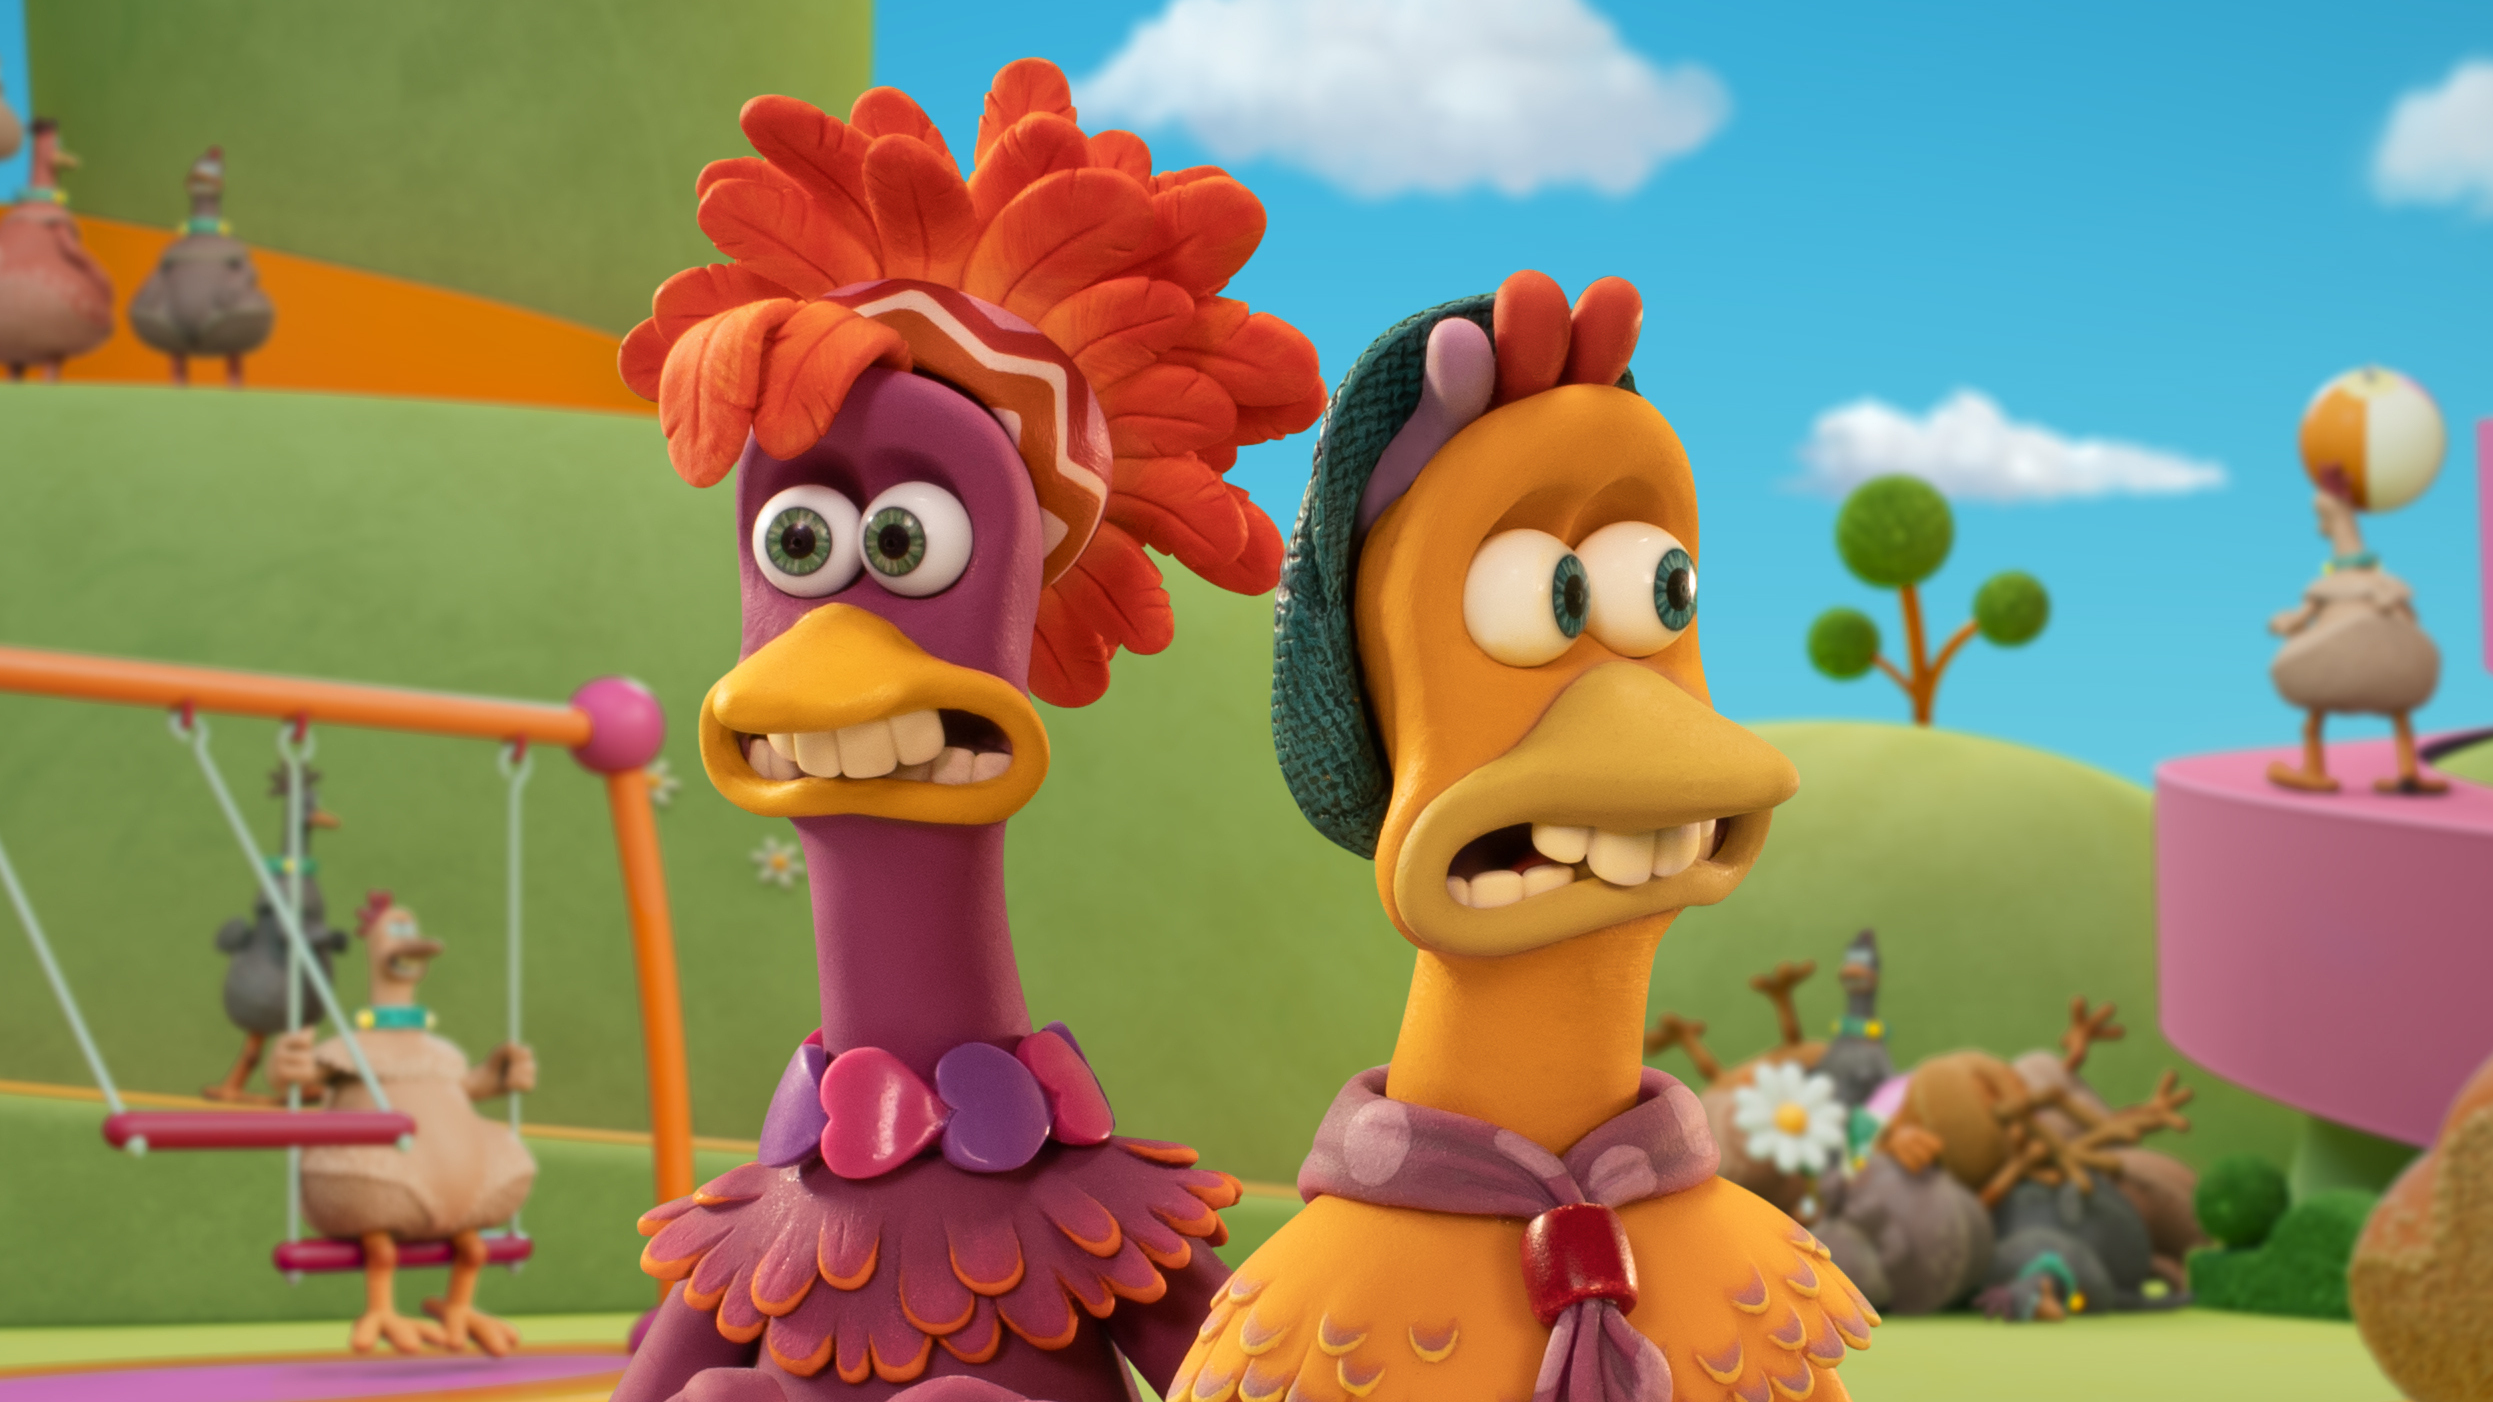 It took 23 years, but a ‘Chicken Run’ sequel has finally hatched